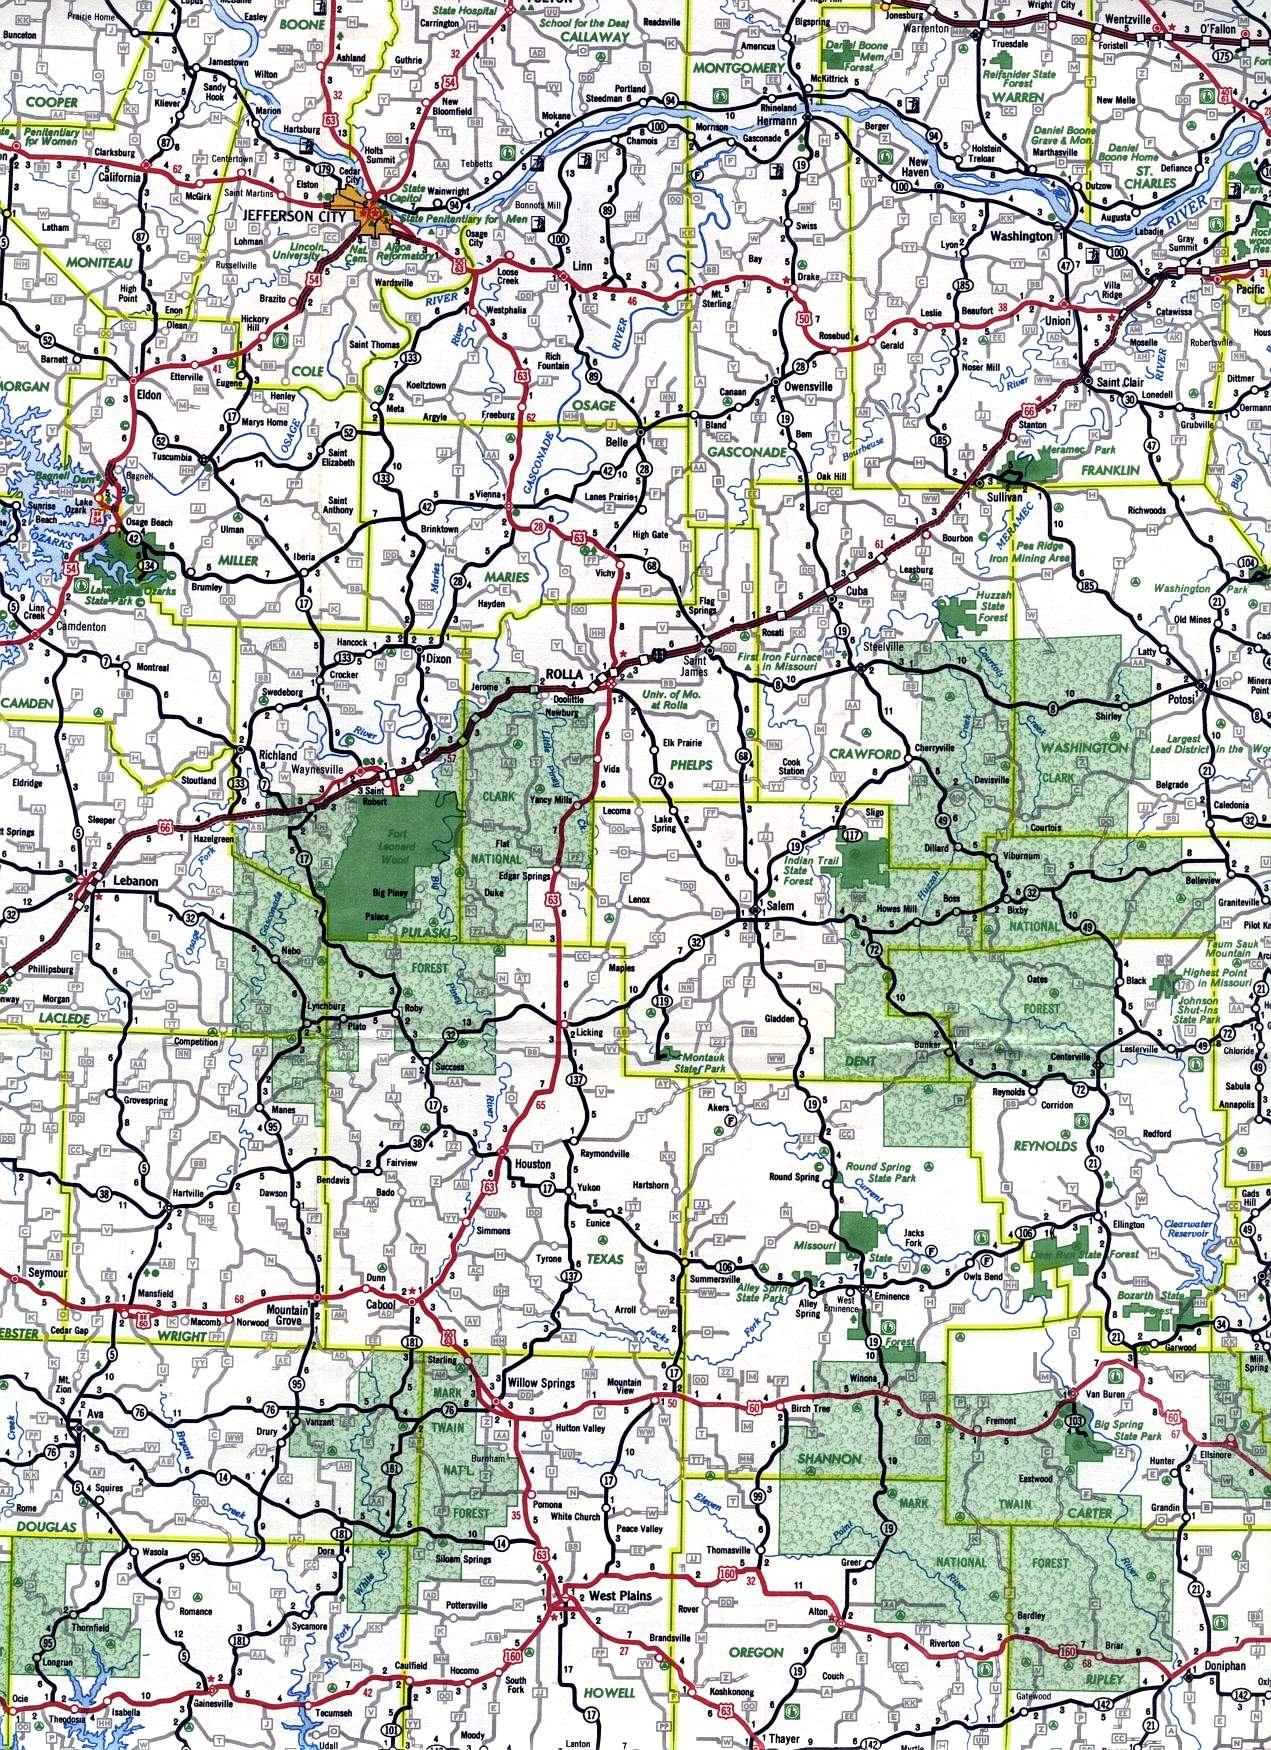 South-central section of Missouri from 1969 official highway map